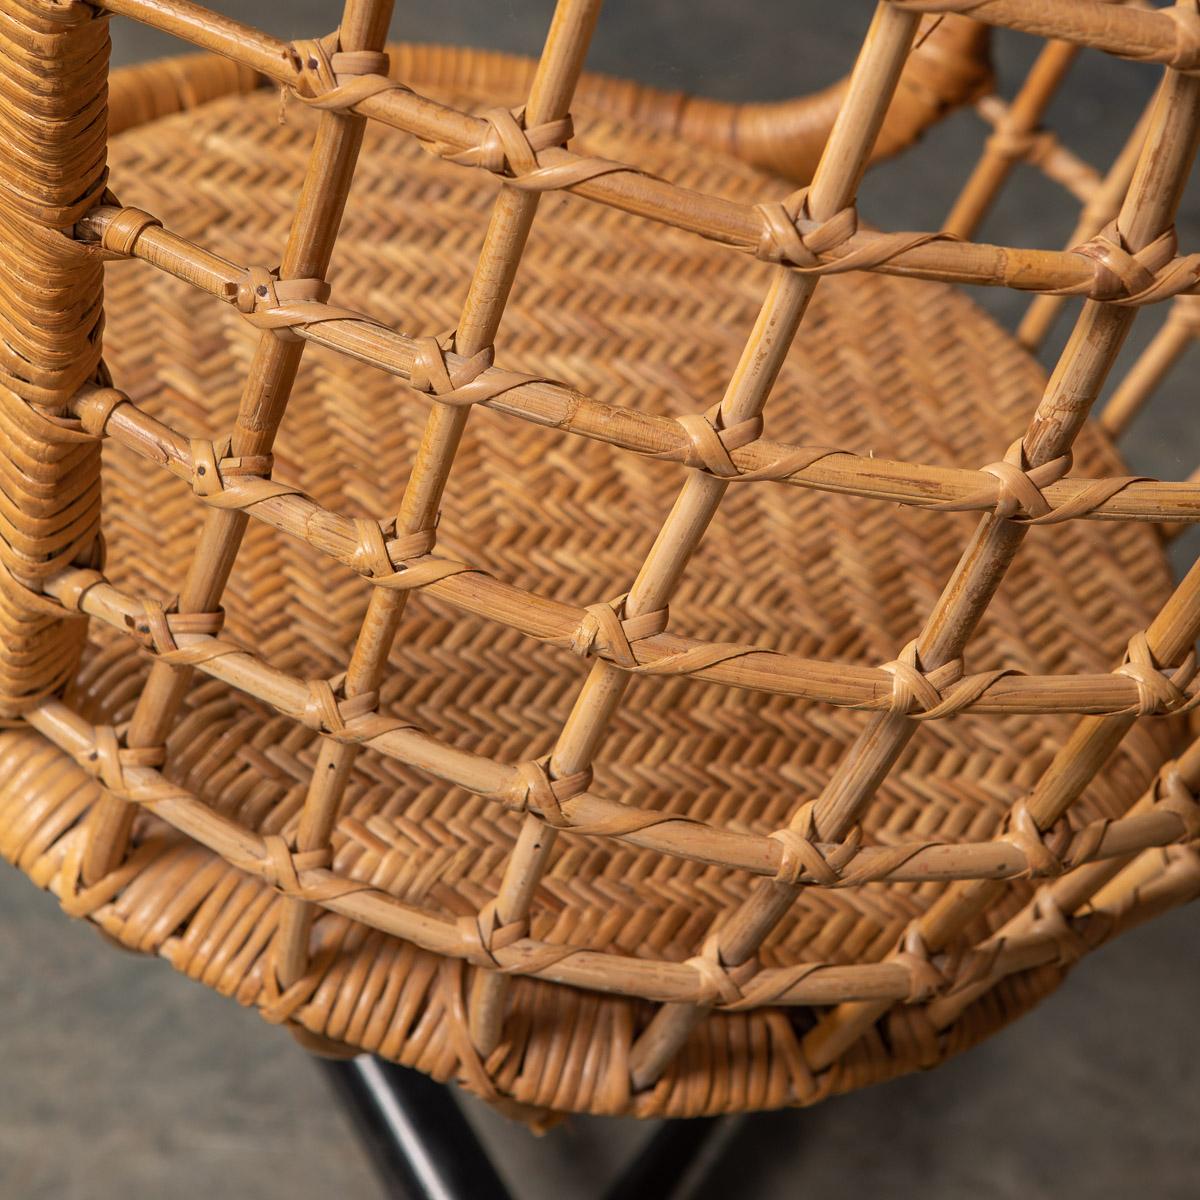 20th Century Hanging Wicker Woven Chair on Steel Frame, 1970s For Sale 7